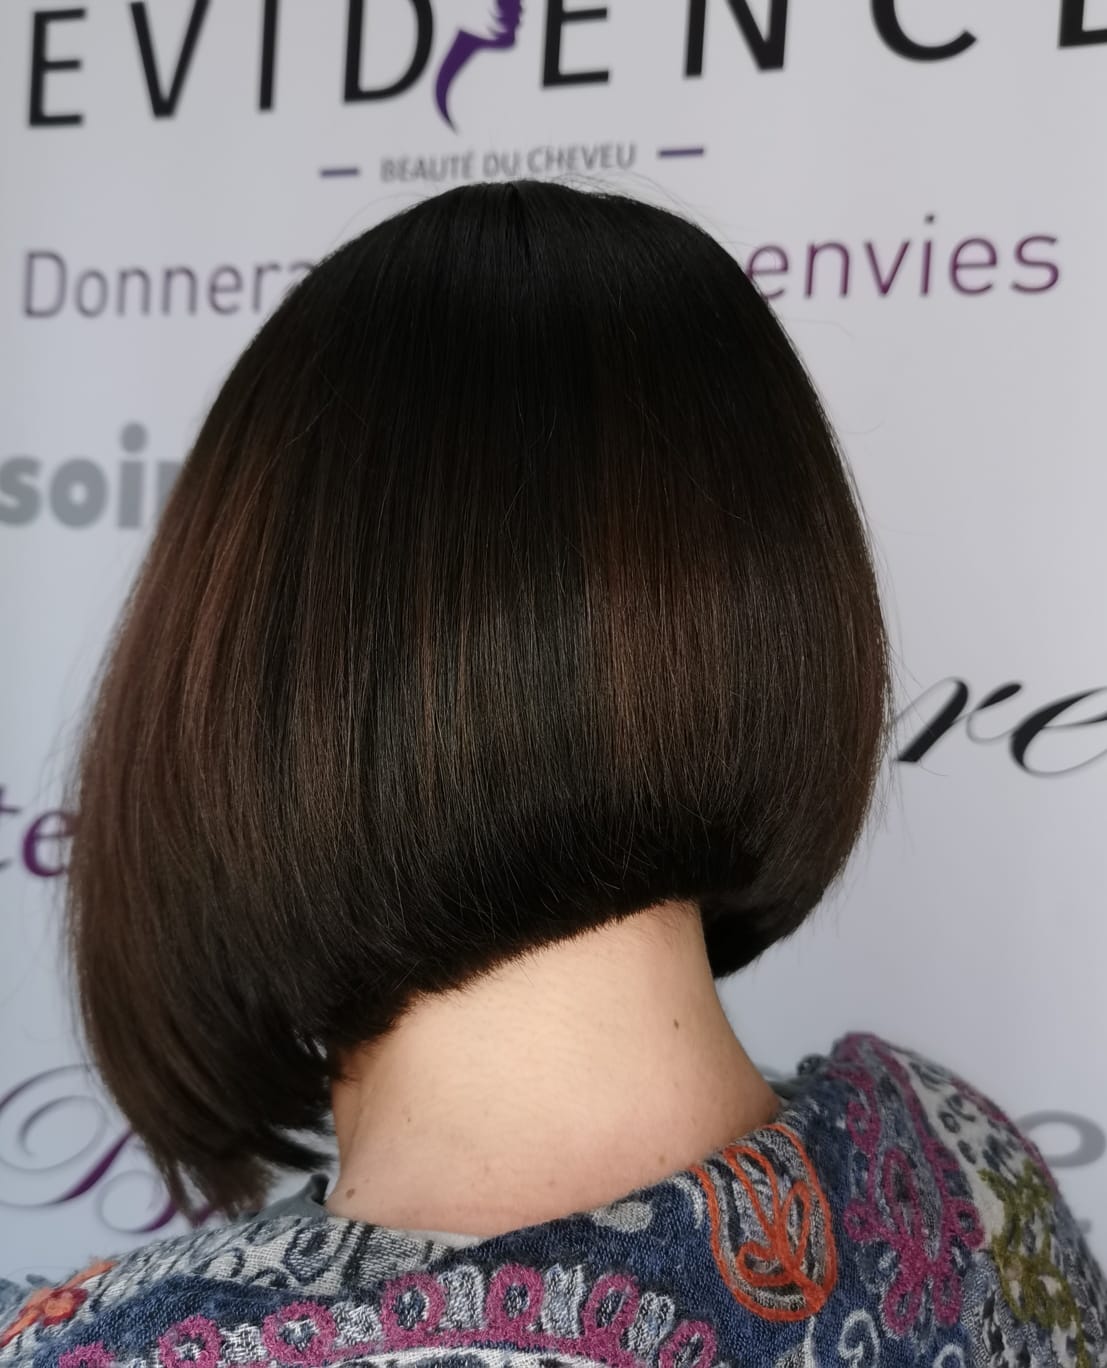 Evidence Coiffure Mallemort - Coupe - Couleur